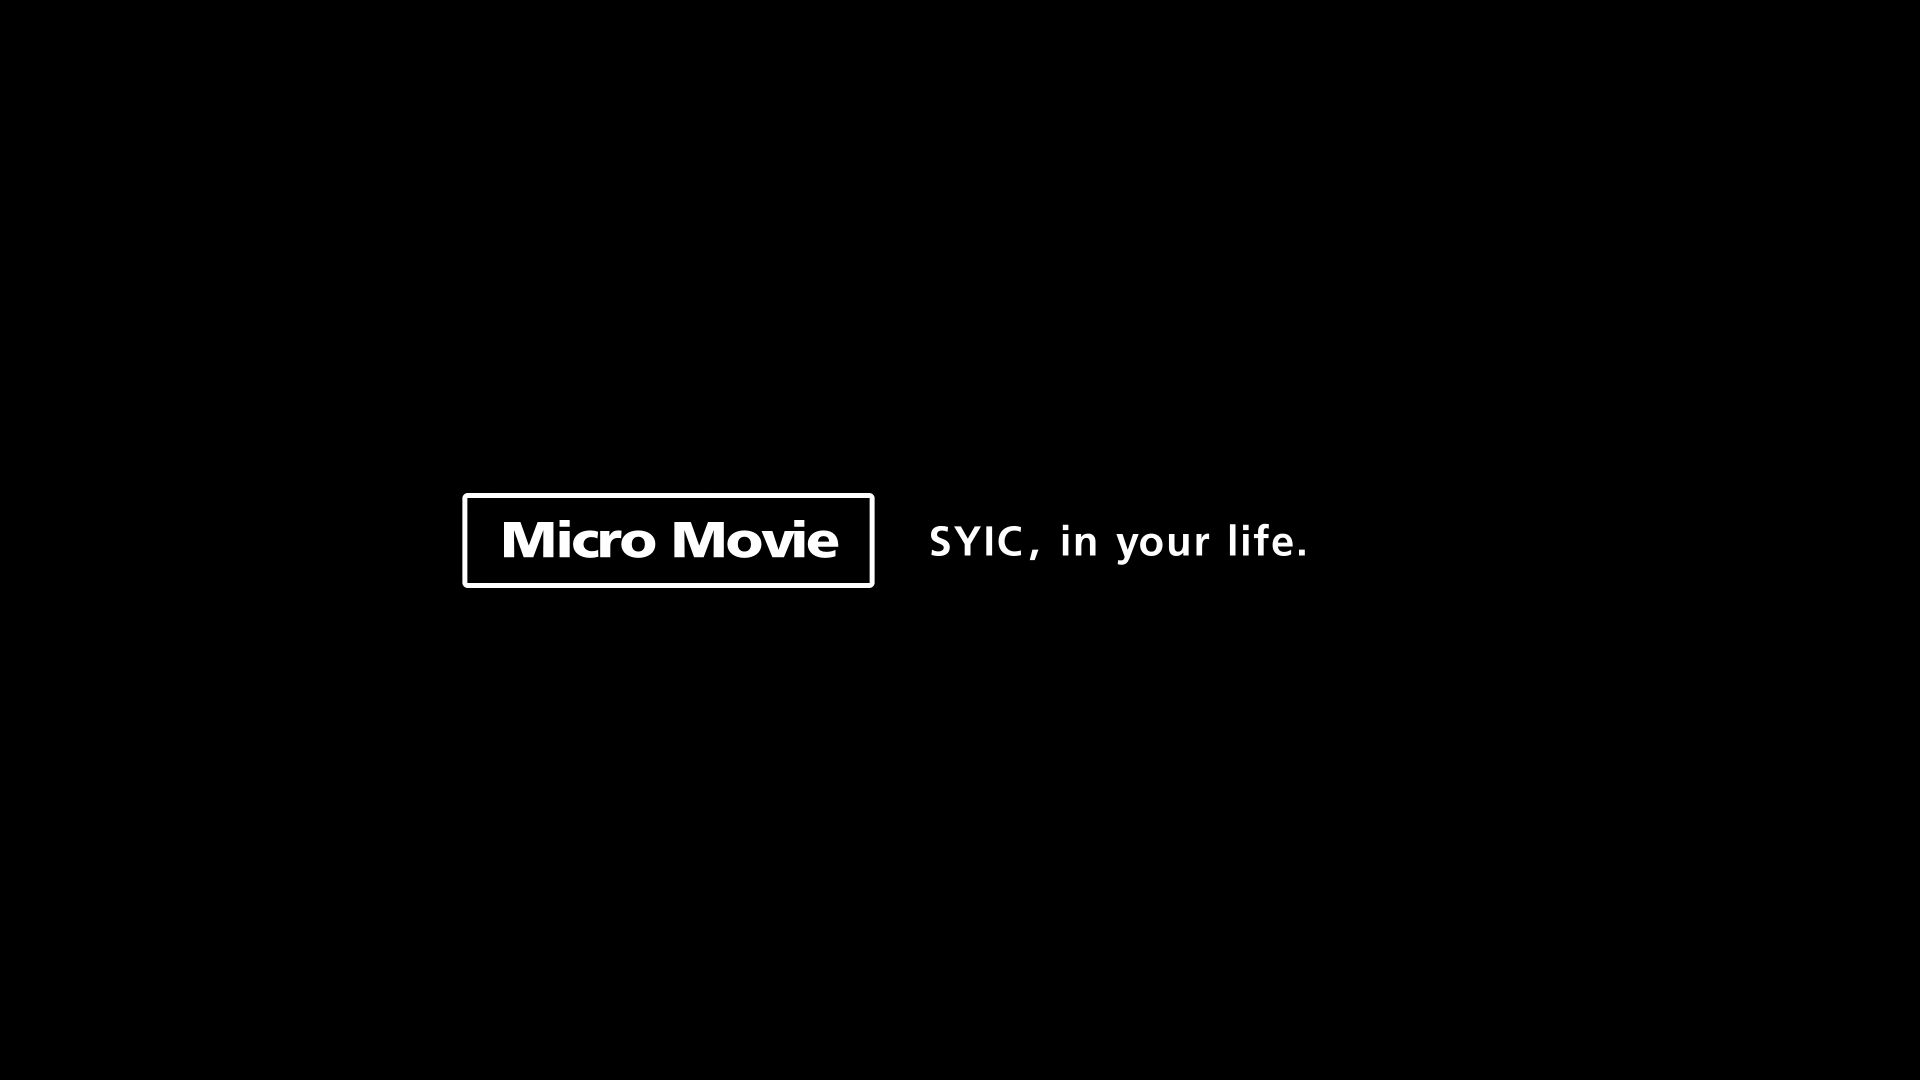 Video|SYIC, in your life (micro movie)